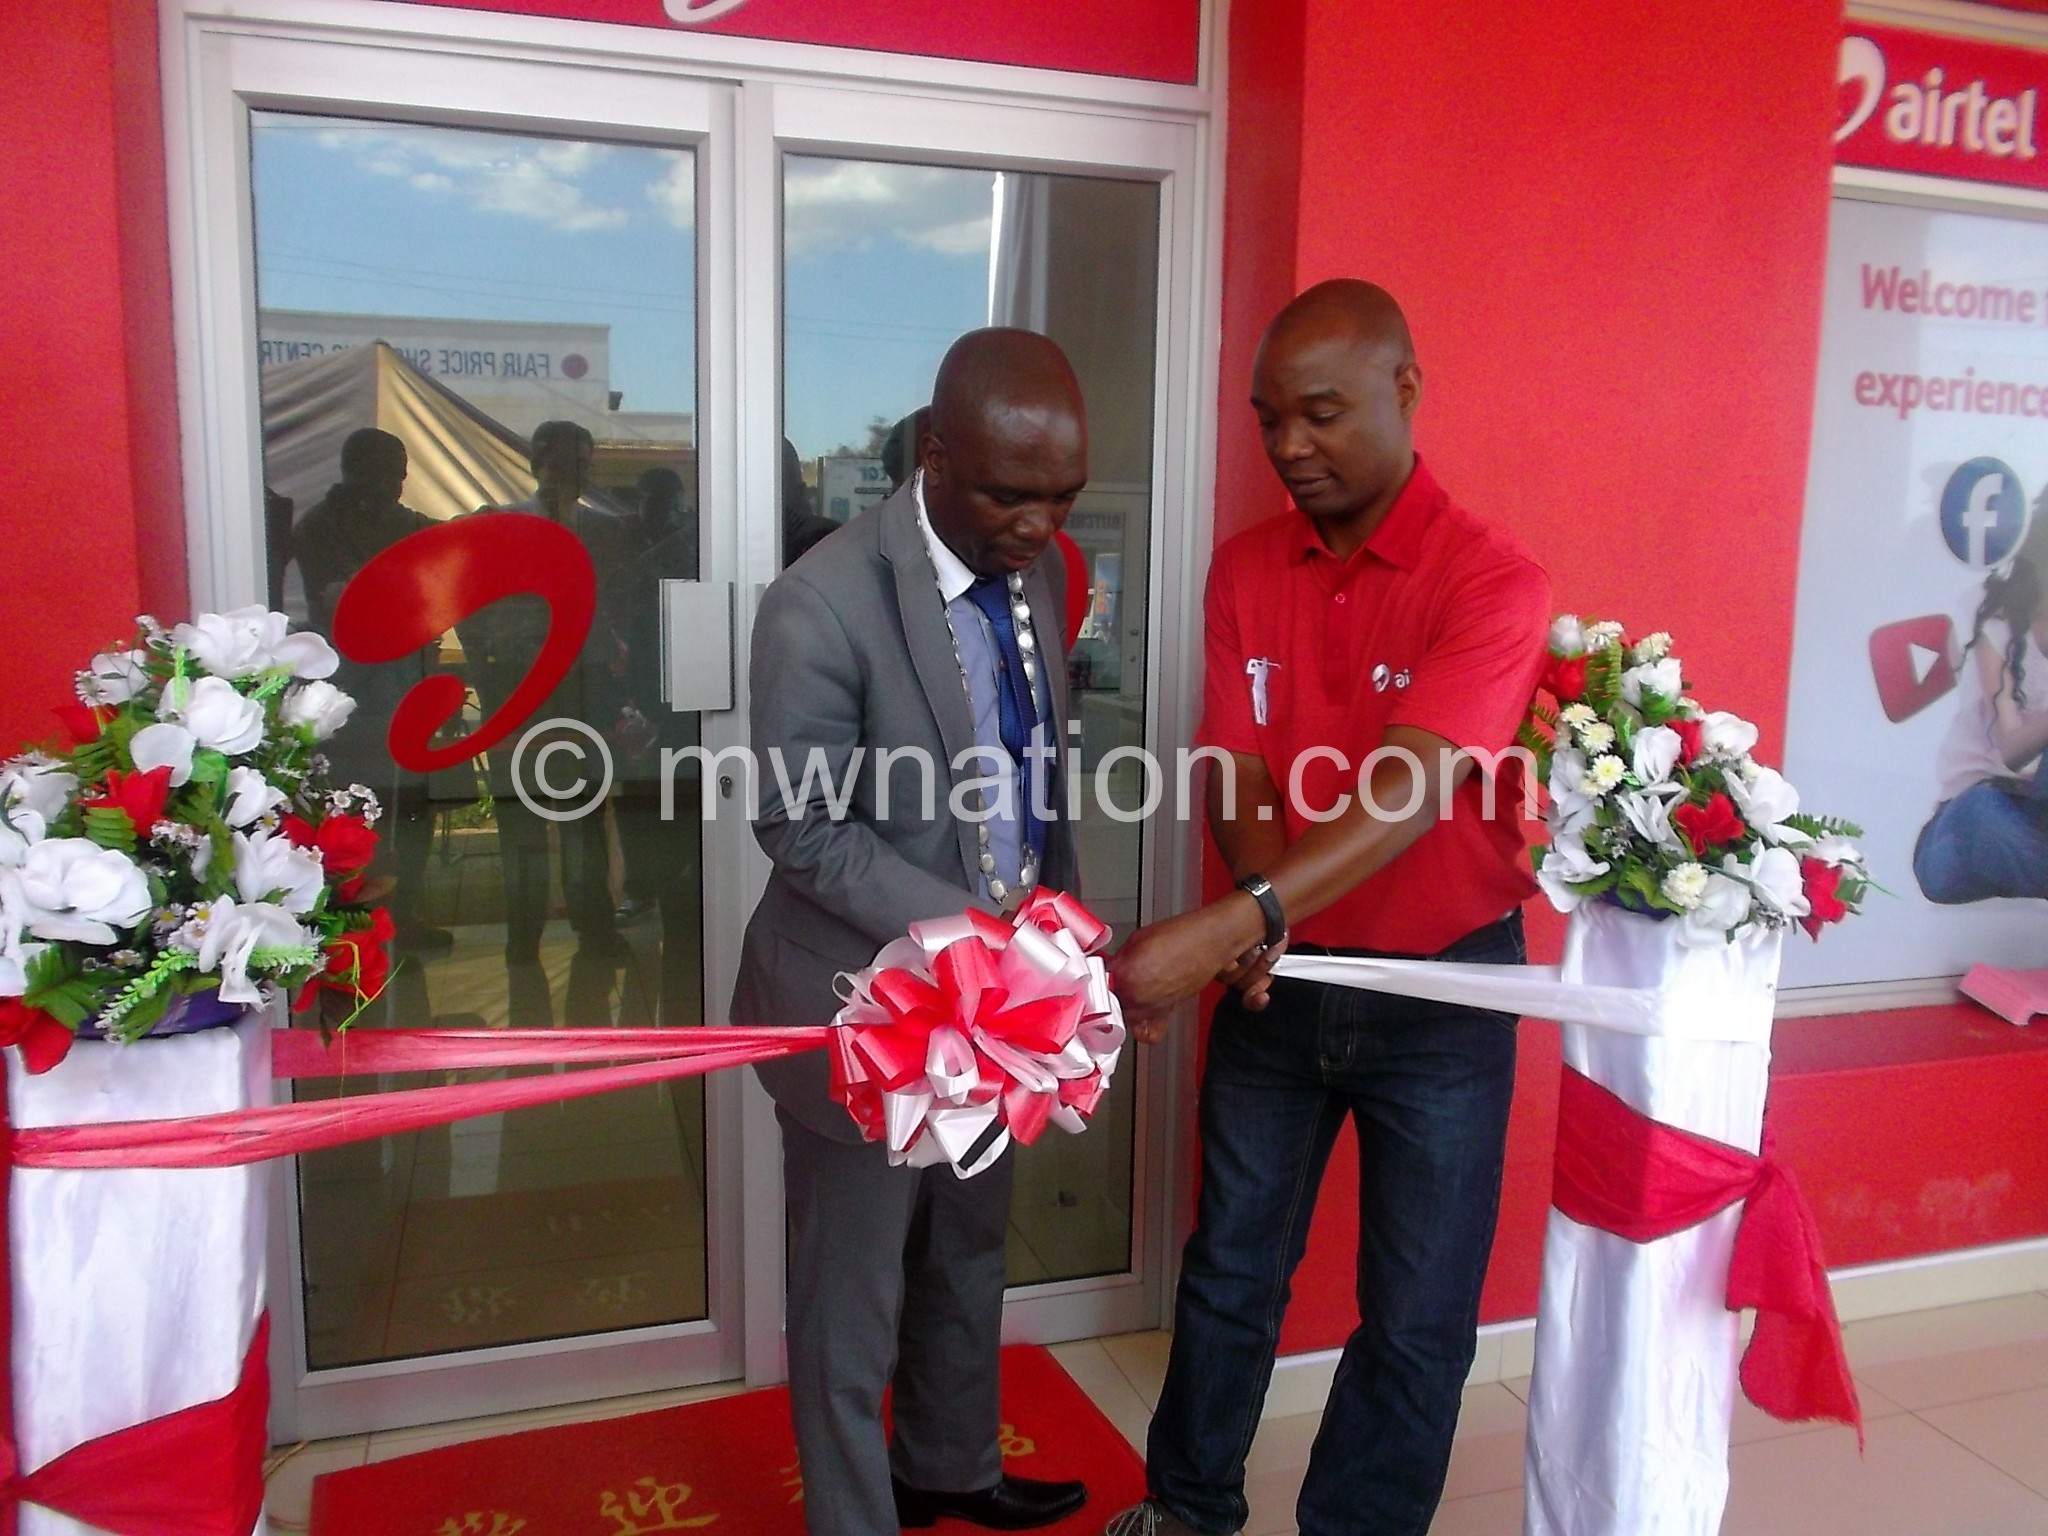 Maunde (L) cutting the ribbon assisted by Kamoto marking the opening of the new shop in Zomba